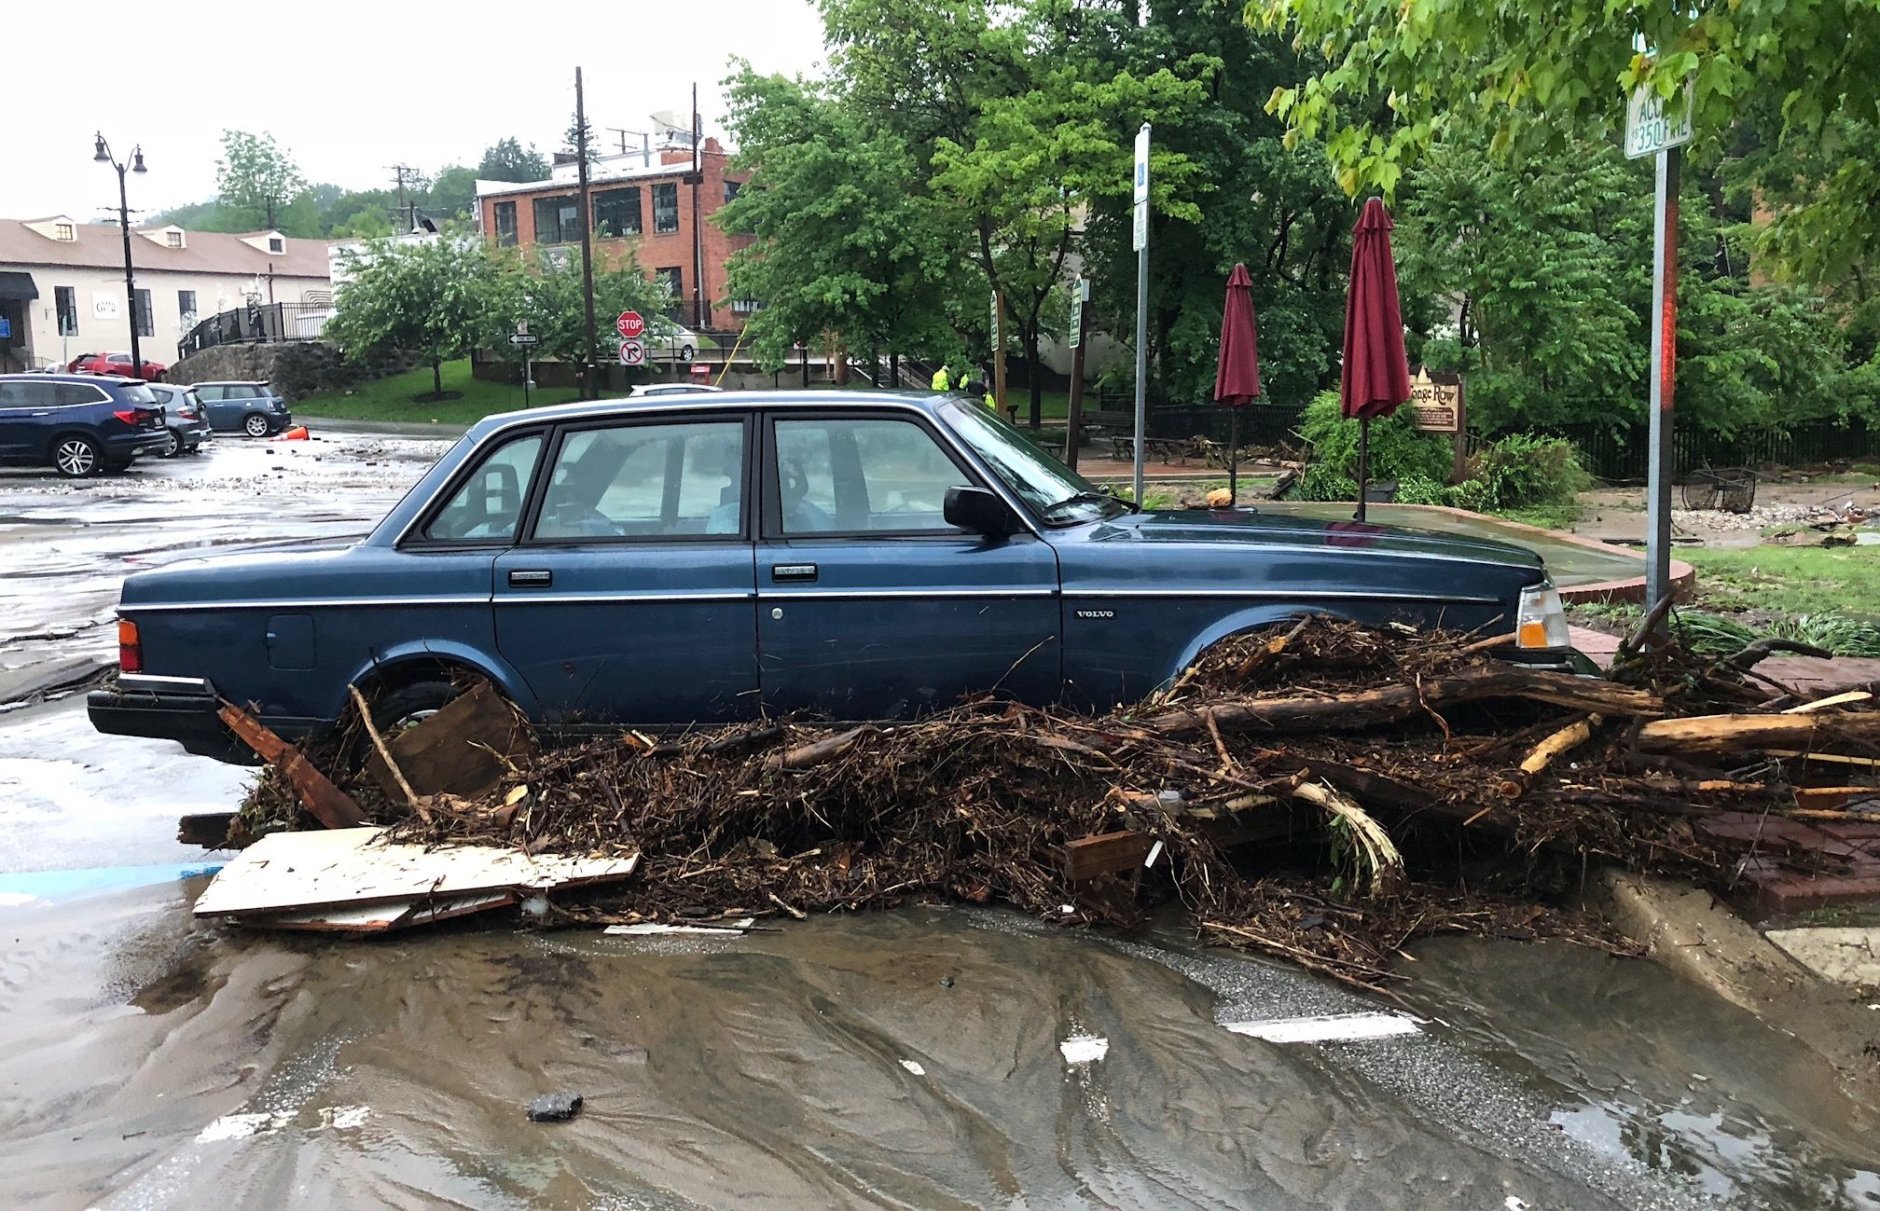 Debris runs through a car in Ellicott City on Sunday, May 27, 2018 during a flood. (WTOP/Dave Dildine)